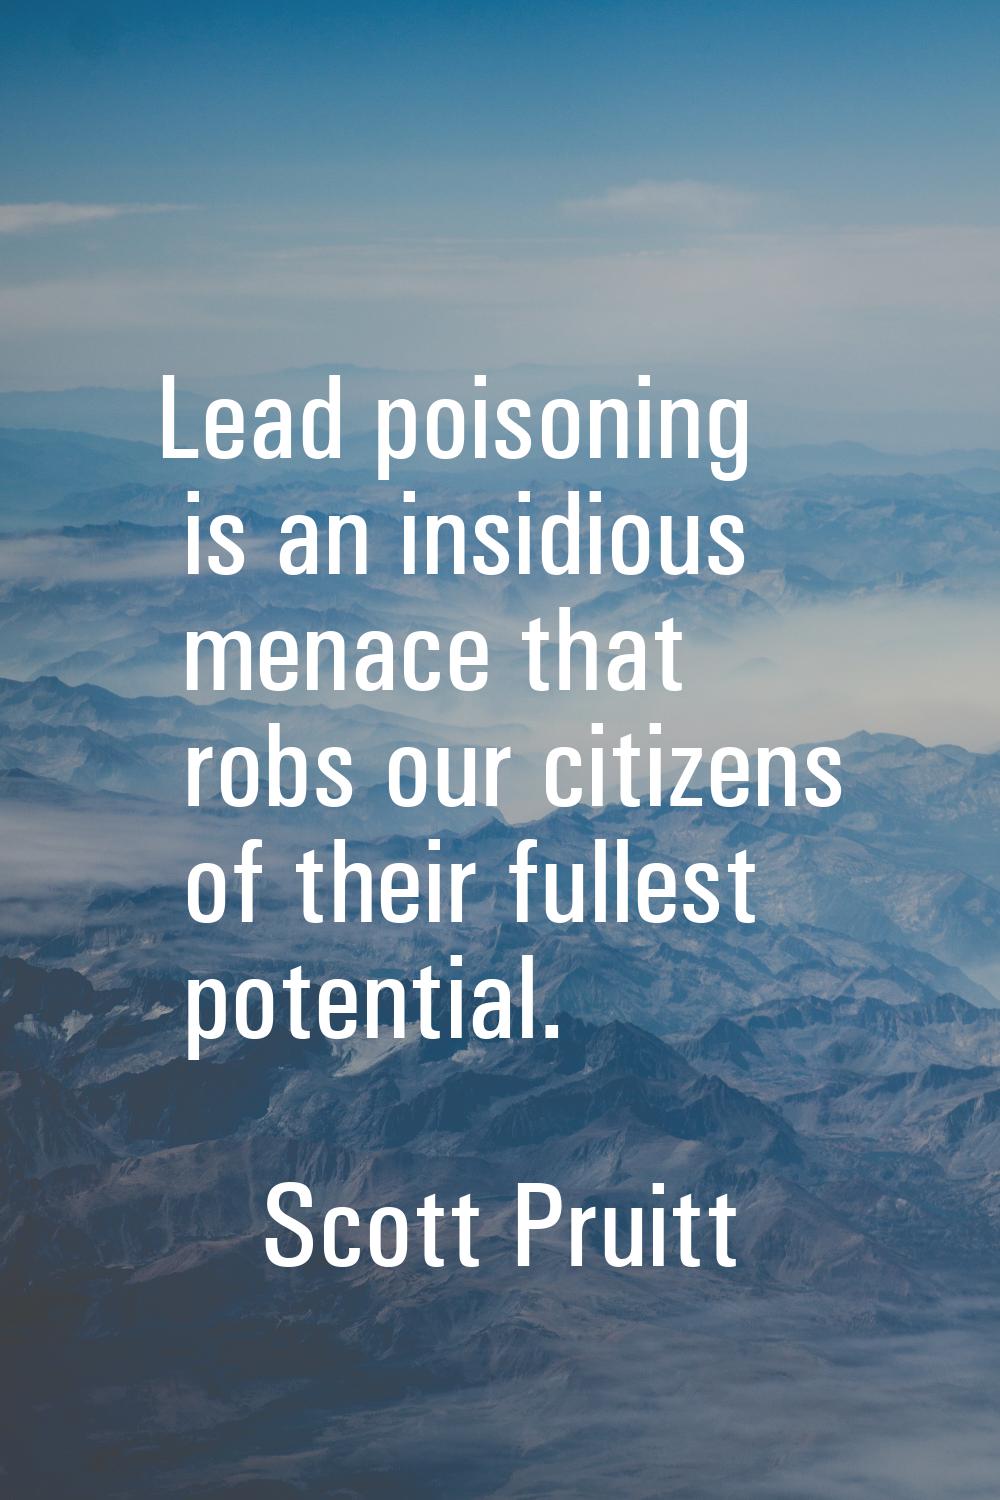 Lead poisoning is an insidious menace that robs our citizens of their fullest potential.